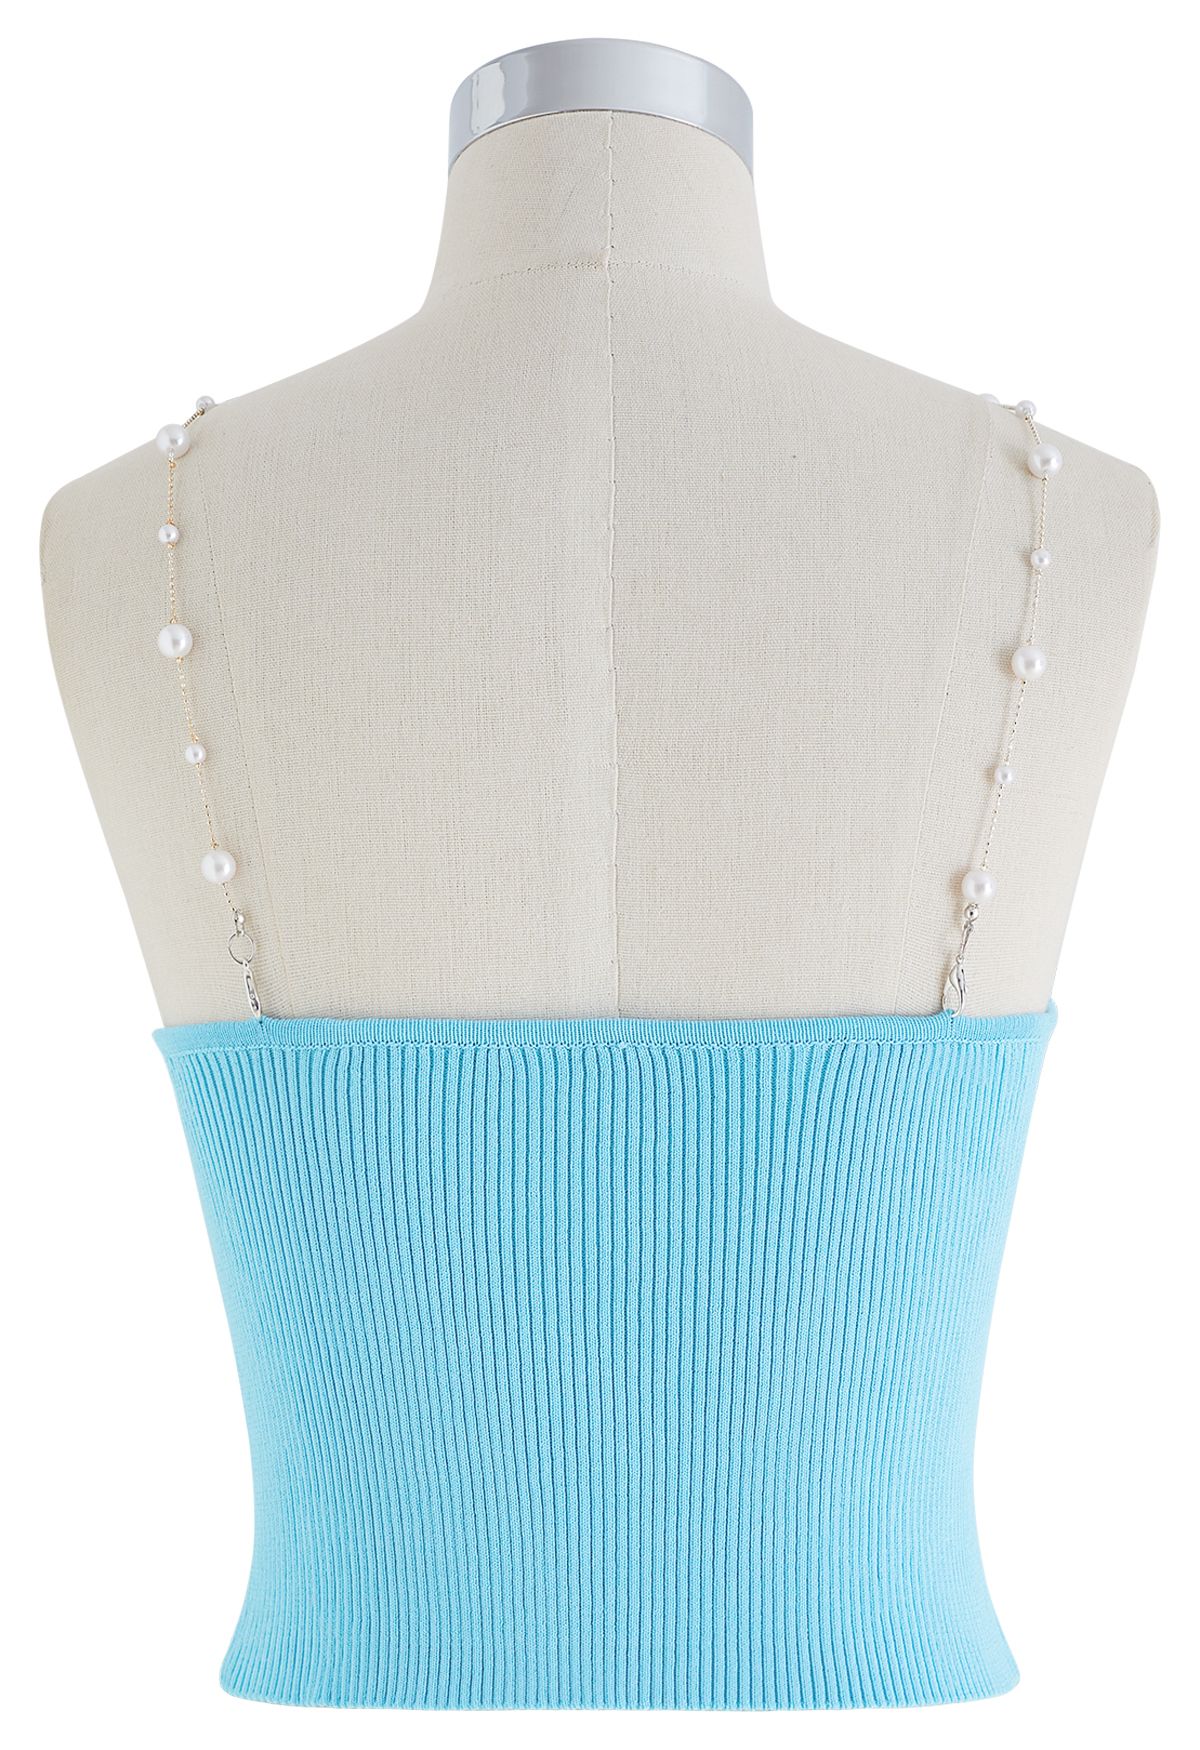 Cropped Knit Pearly Tank Top in Baby Blue